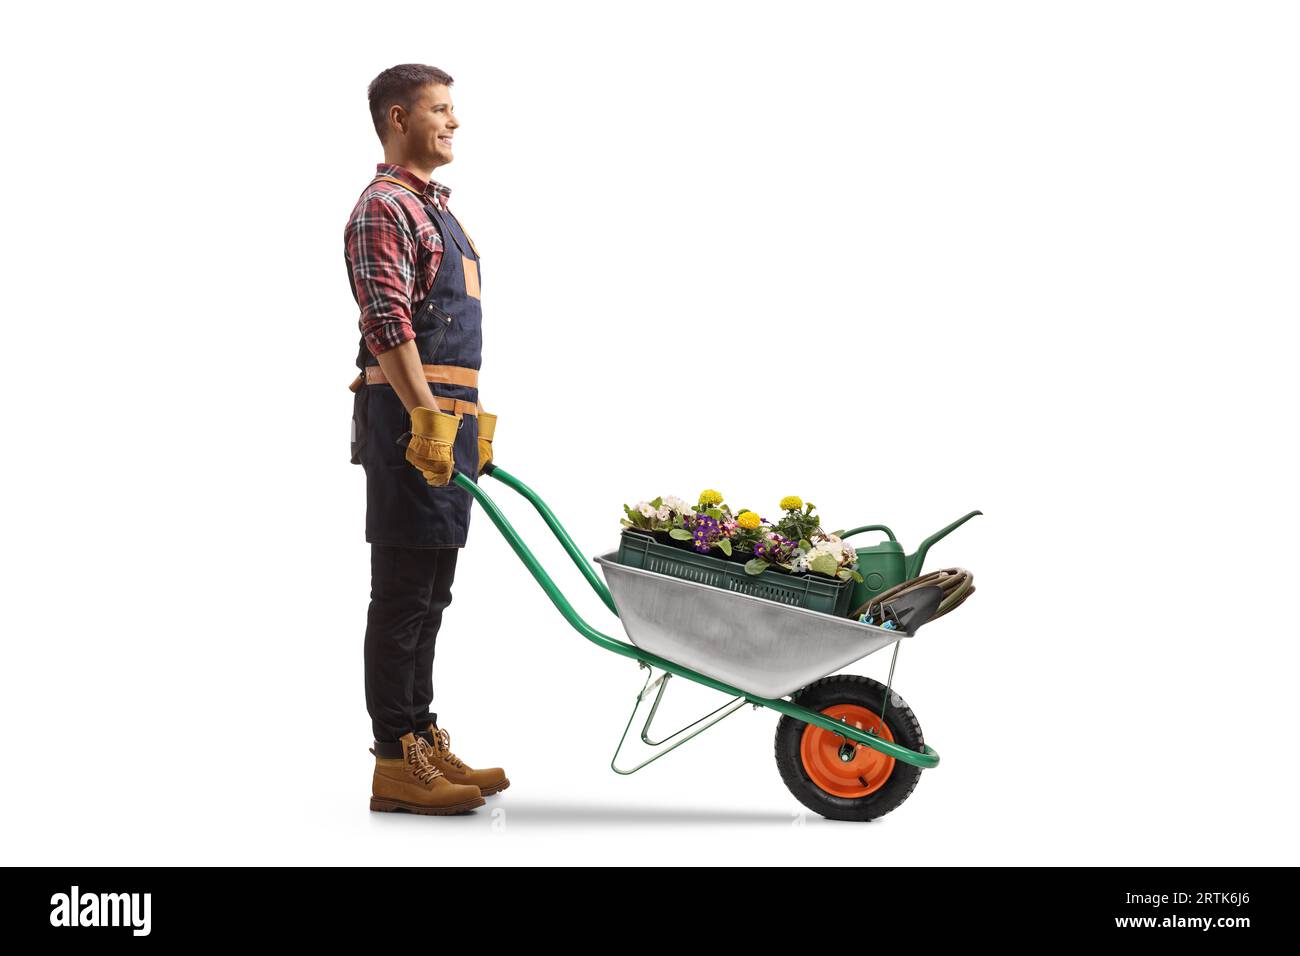 Full length profile shot of a gardener standing with a wheelbarrow full of flowers isolated on white background Stock Photo